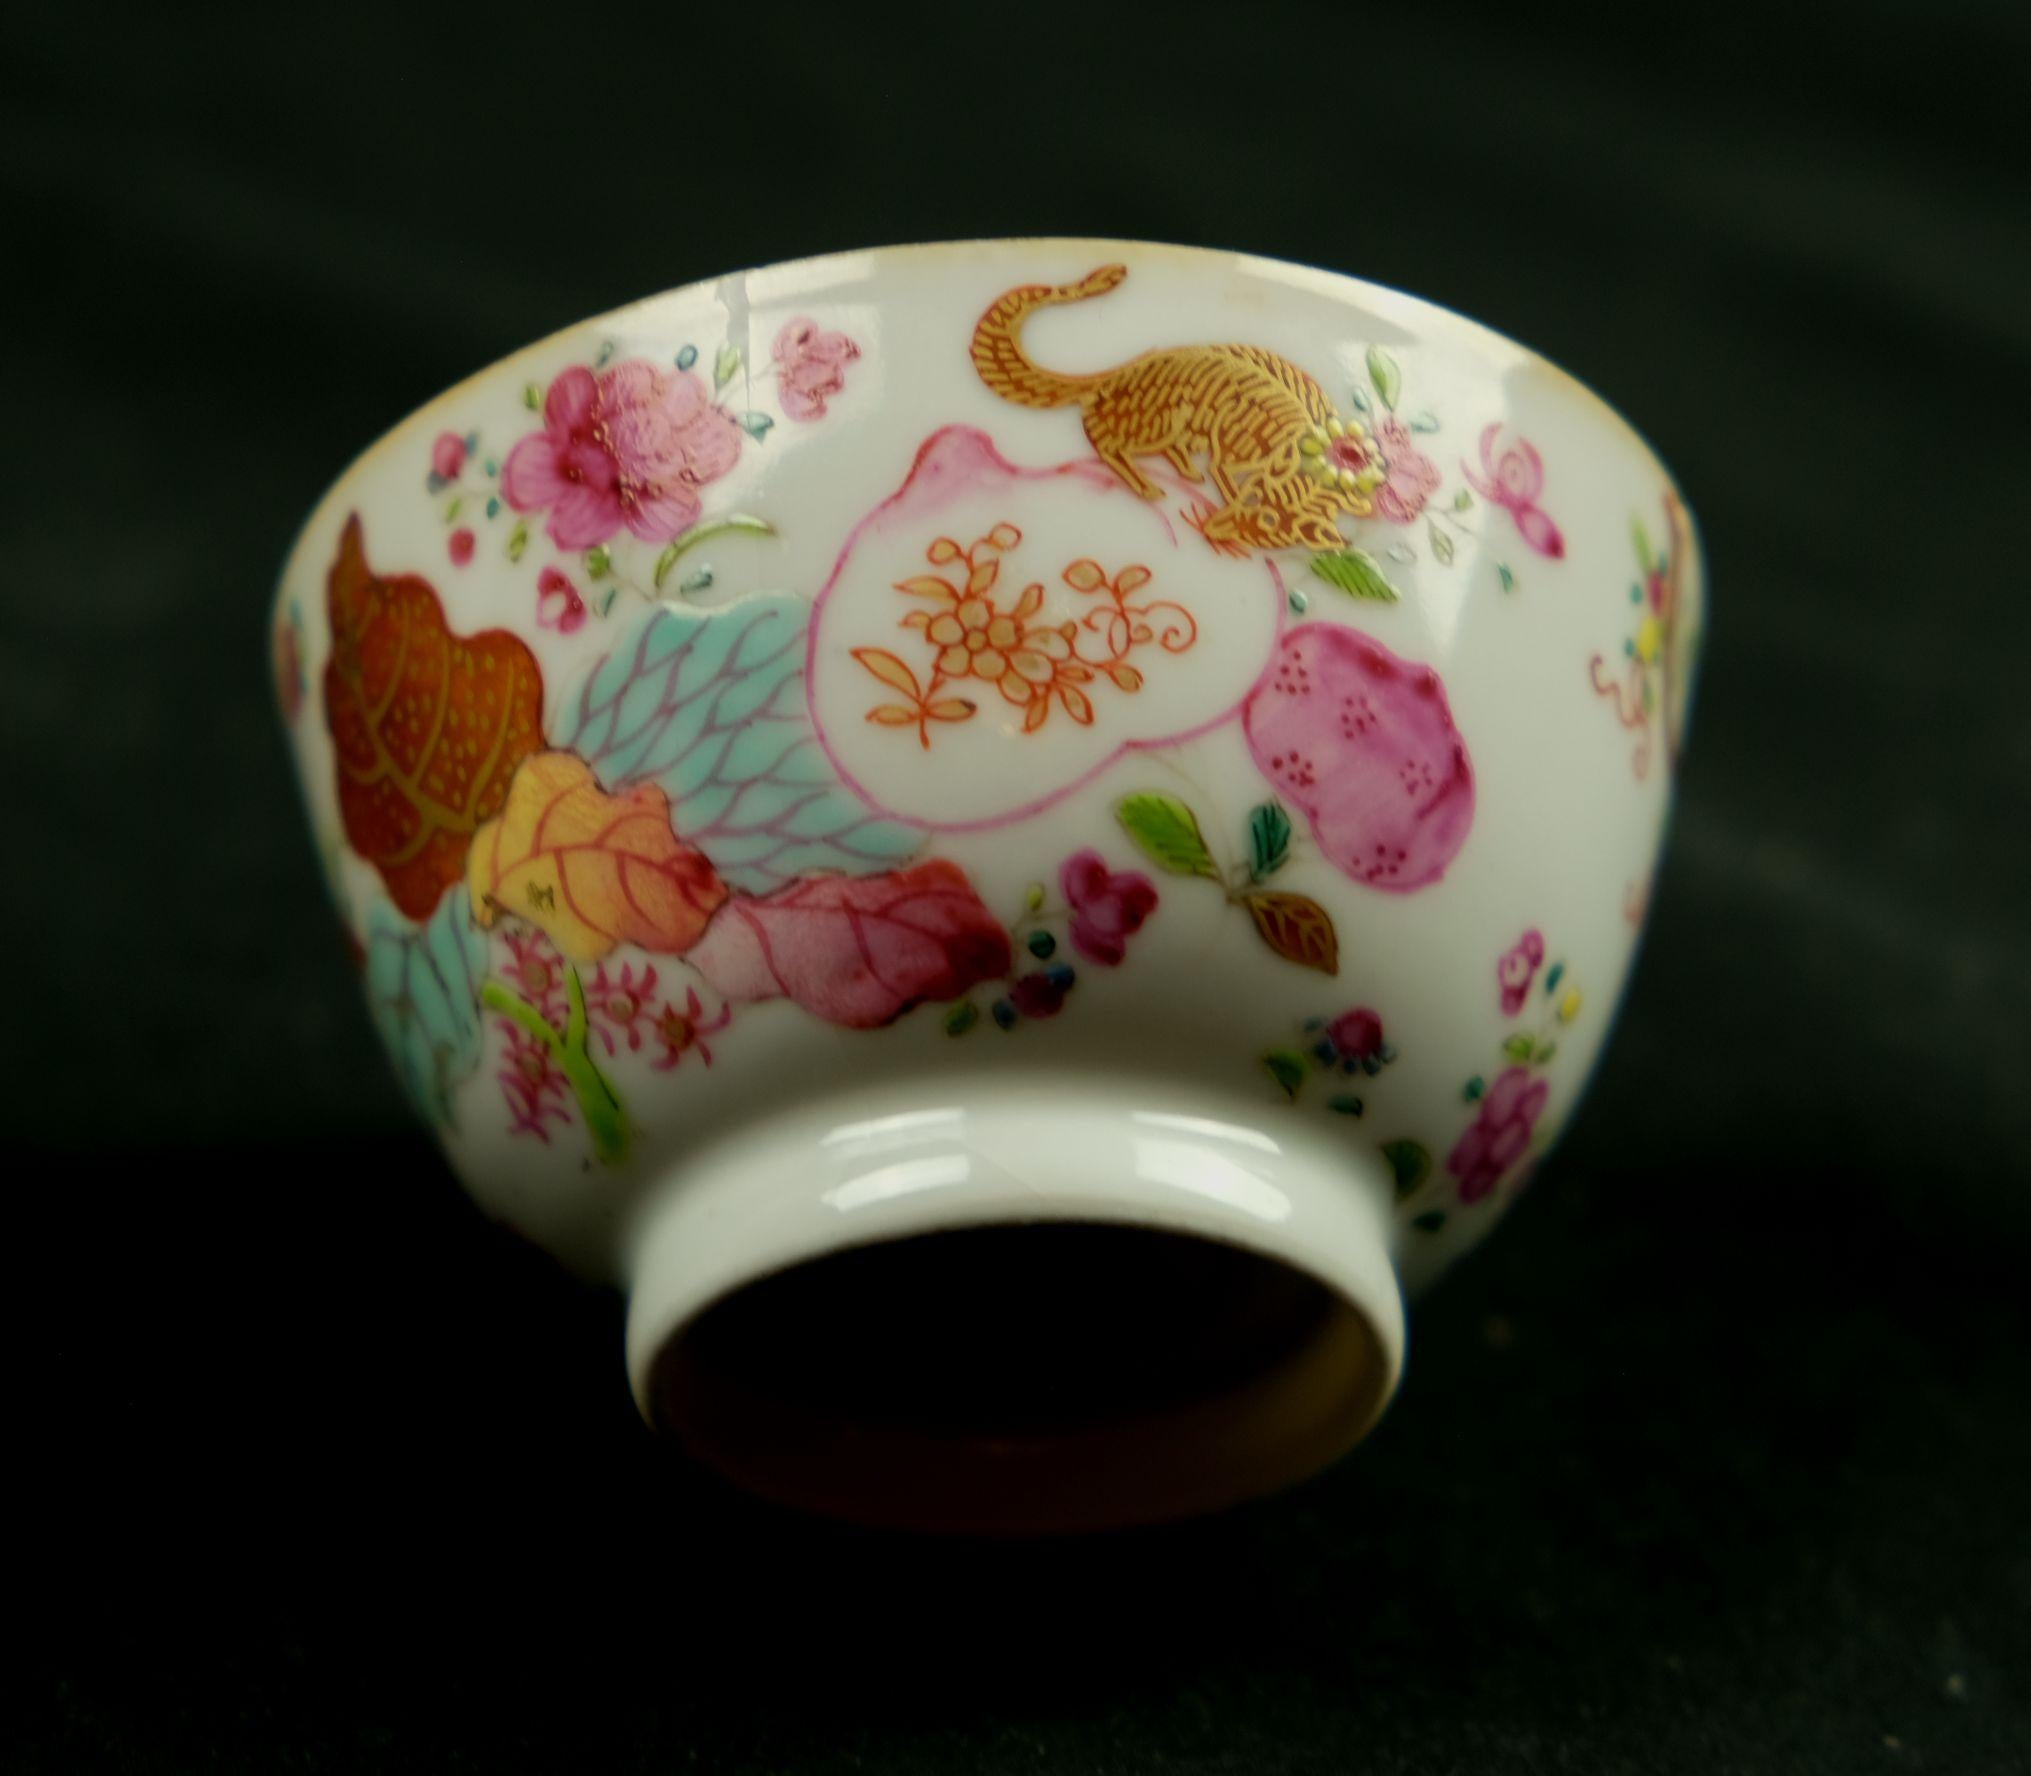 Antique Chinese Famille Rose Tobacco Leaf Tea Bawl Cup & Saucer Porcelain In Good Condition For Sale In Norton, MA